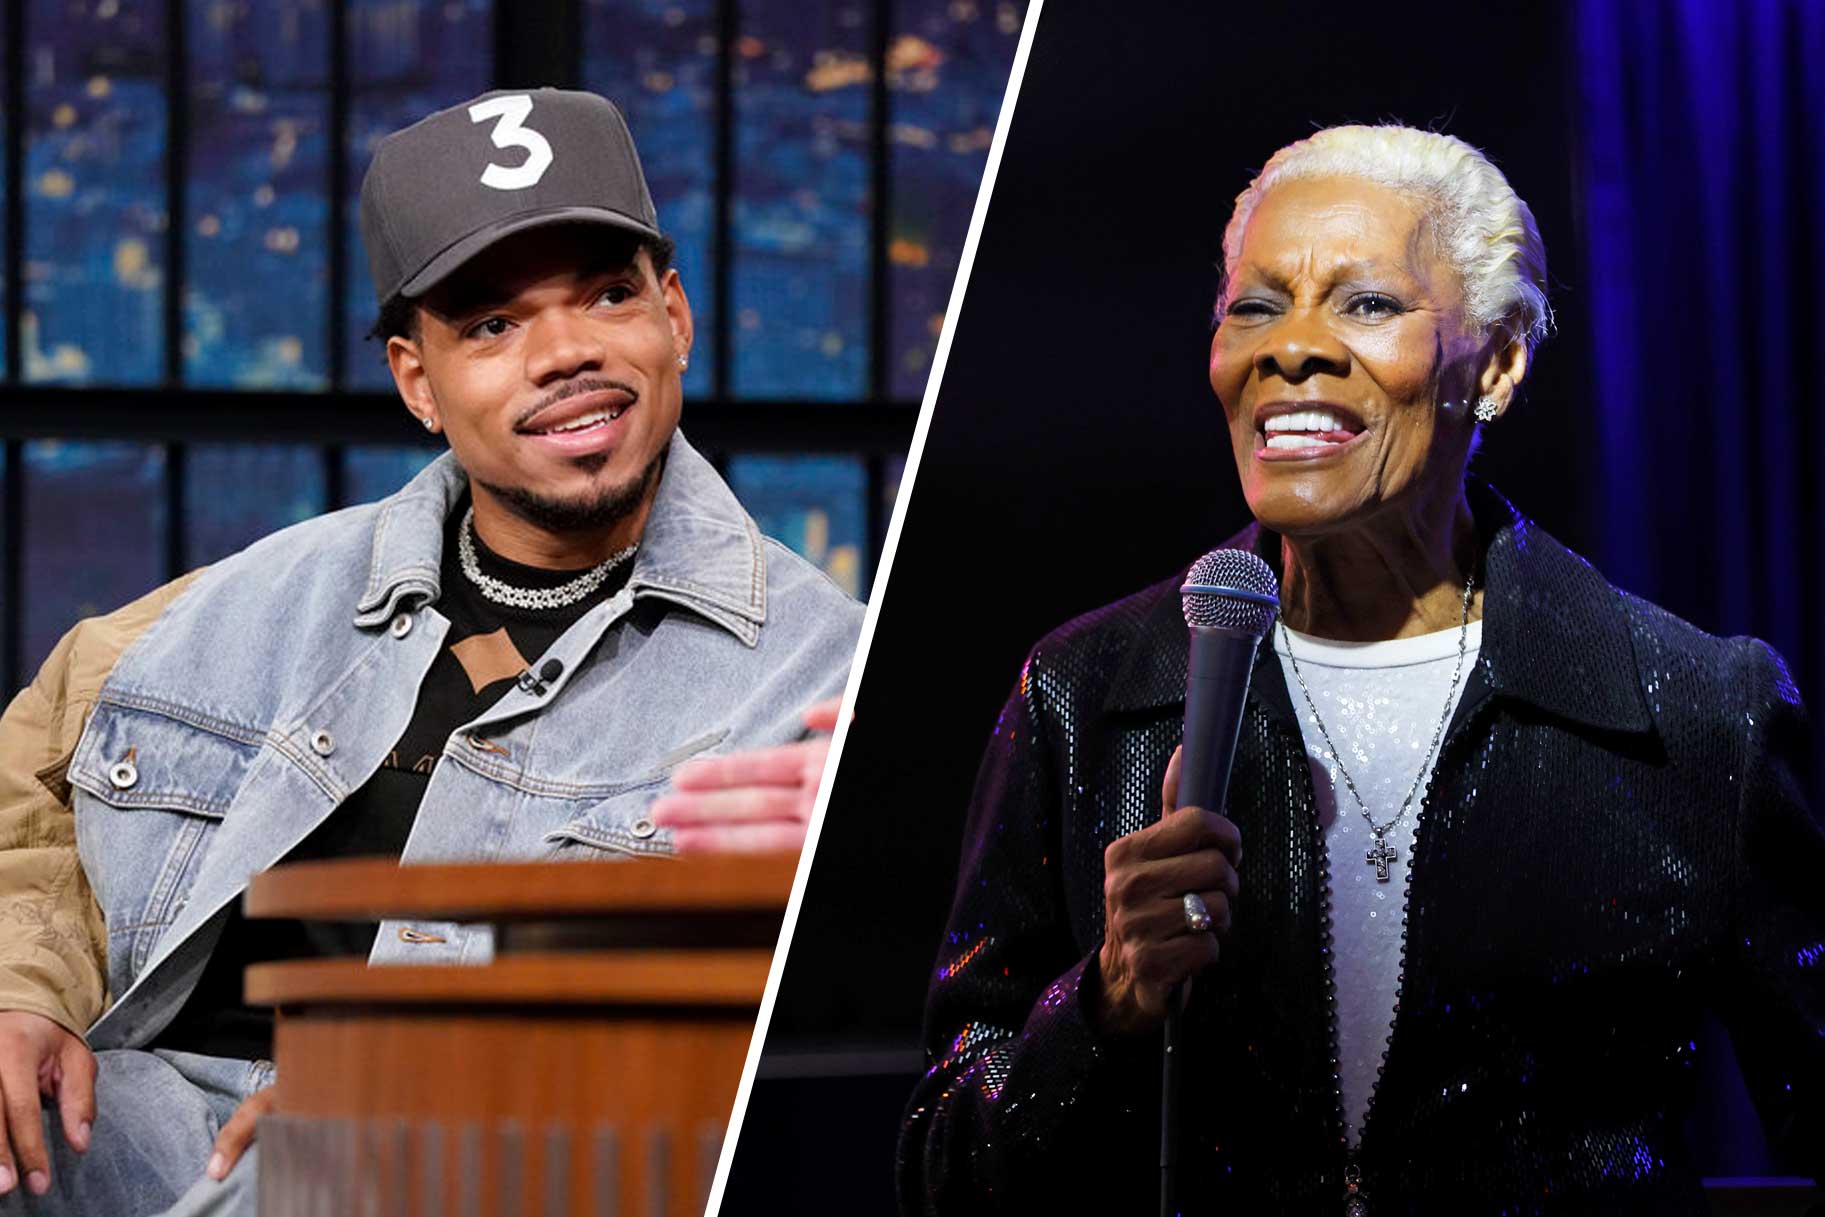 Split image of Chance the Rapper and Dionne Warwick.